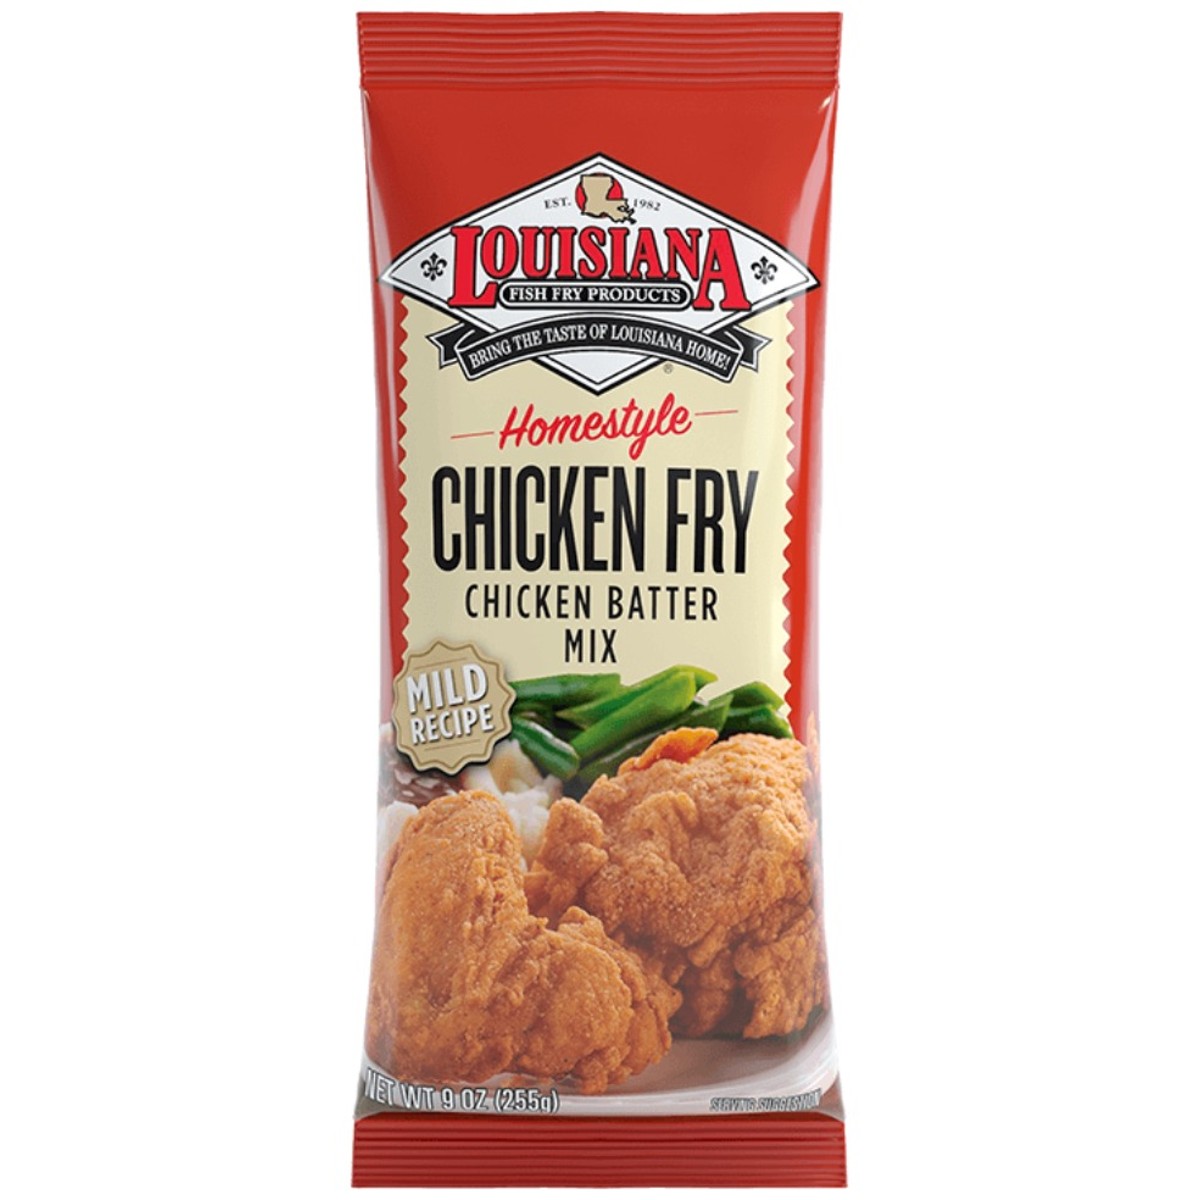  Louisiana Seasoned Crispy Chicken Fry Batter 9oz (Pack of 2) -  Authentic Southern Goodness for Perfect Fried Chicken - Disctint Blend of  Louisiana Spices - Perfect for Creating Crispy and